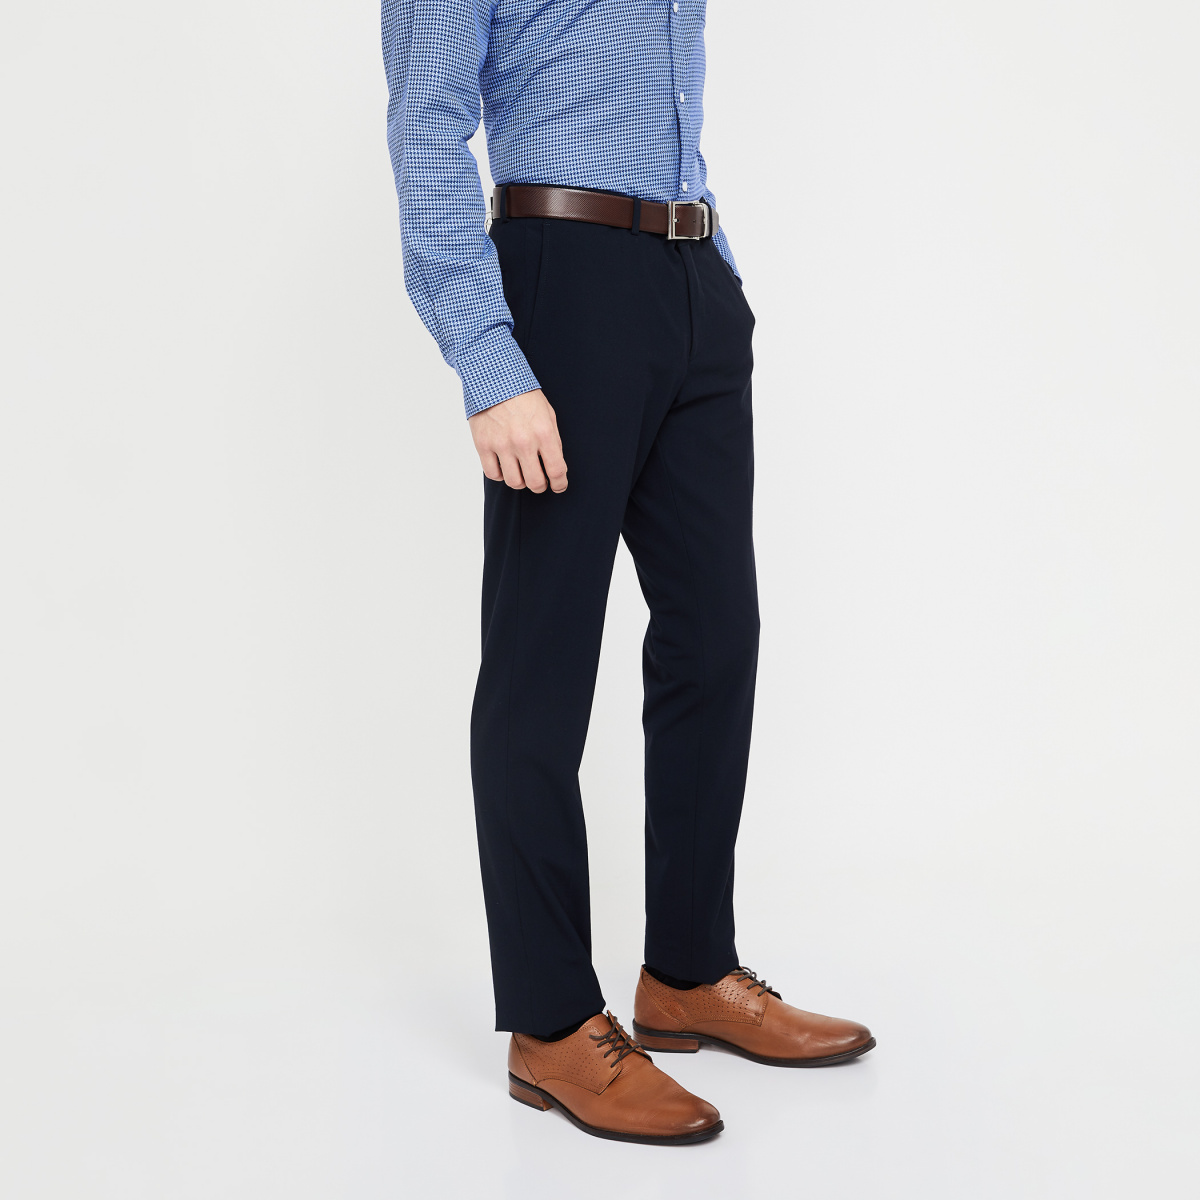 Louis Philippe Trousers & Lowers sale - discounted price | FASHIOLA INDIA